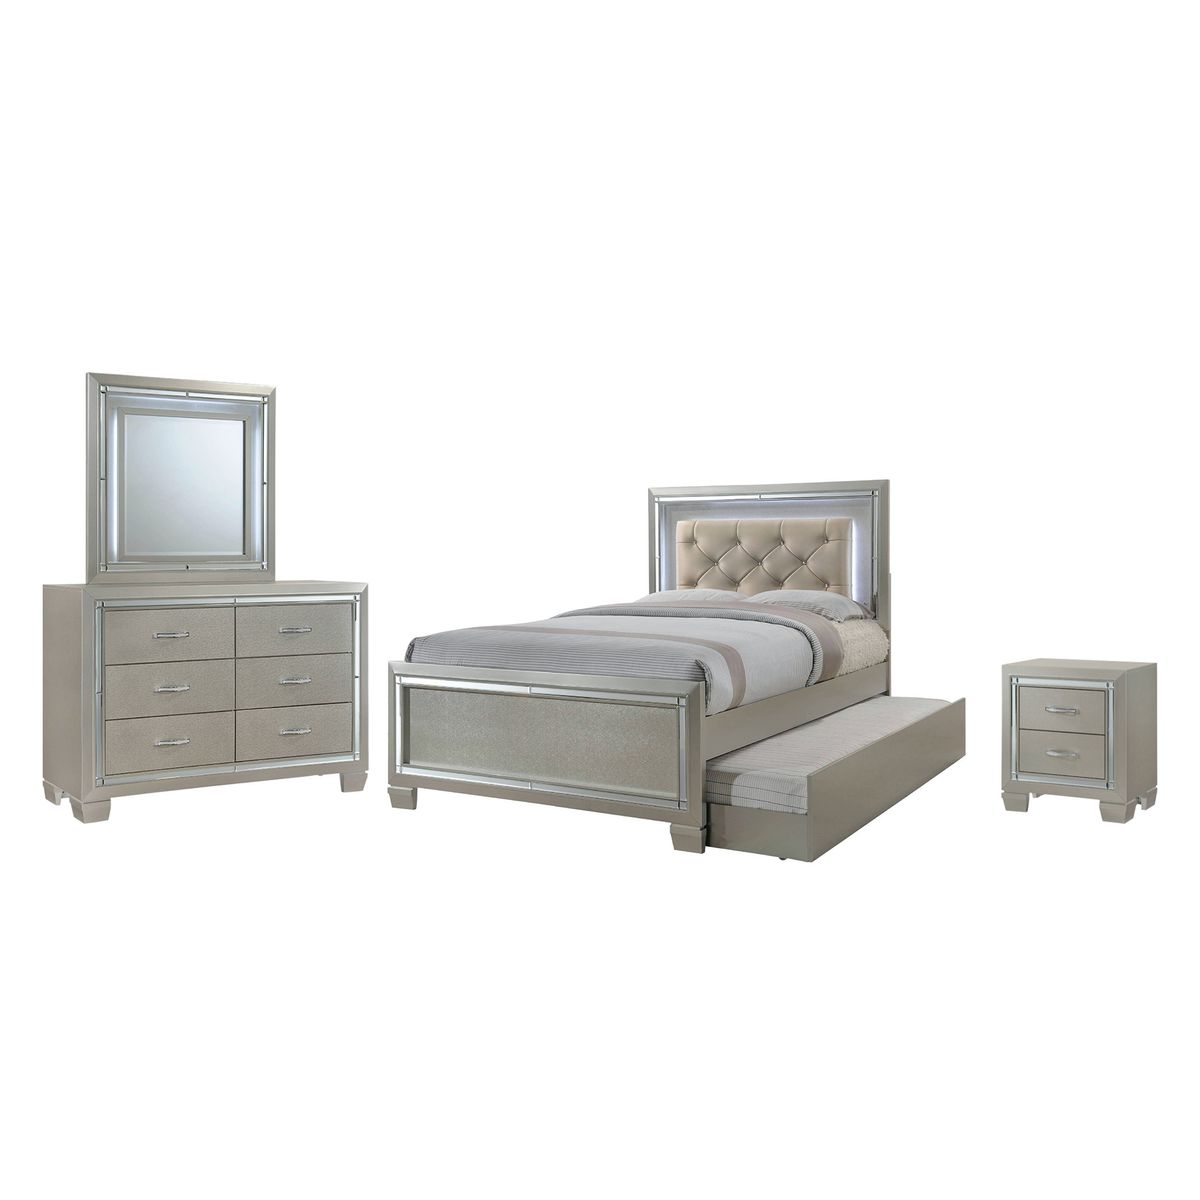 Platinum Youth Twin Bed with Trundle, Dresser Mirror, Nightstand, Mattress Free!